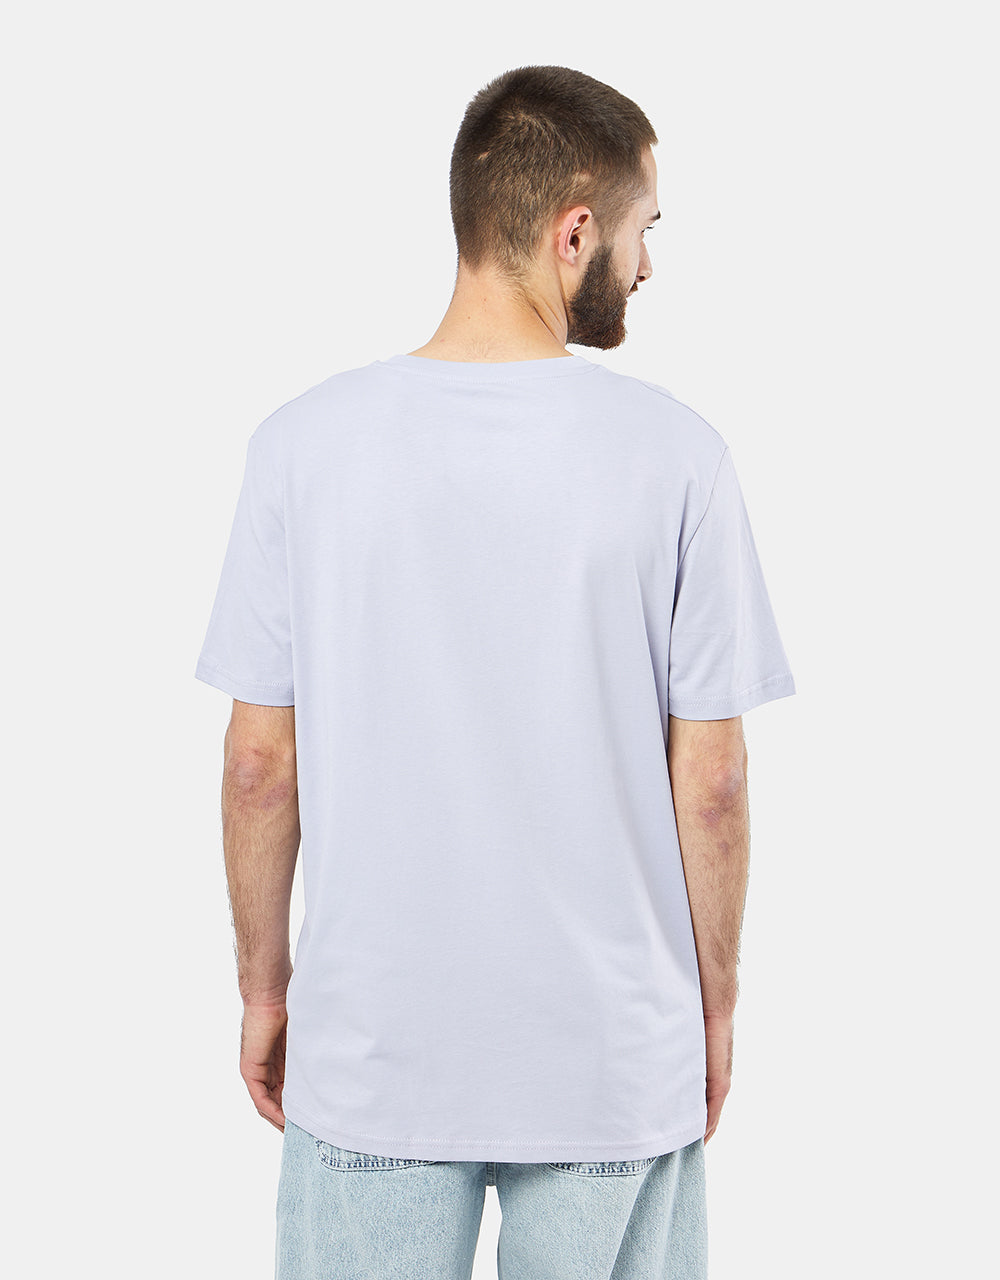 Playdude Out of Body T-Shirt - Orchid